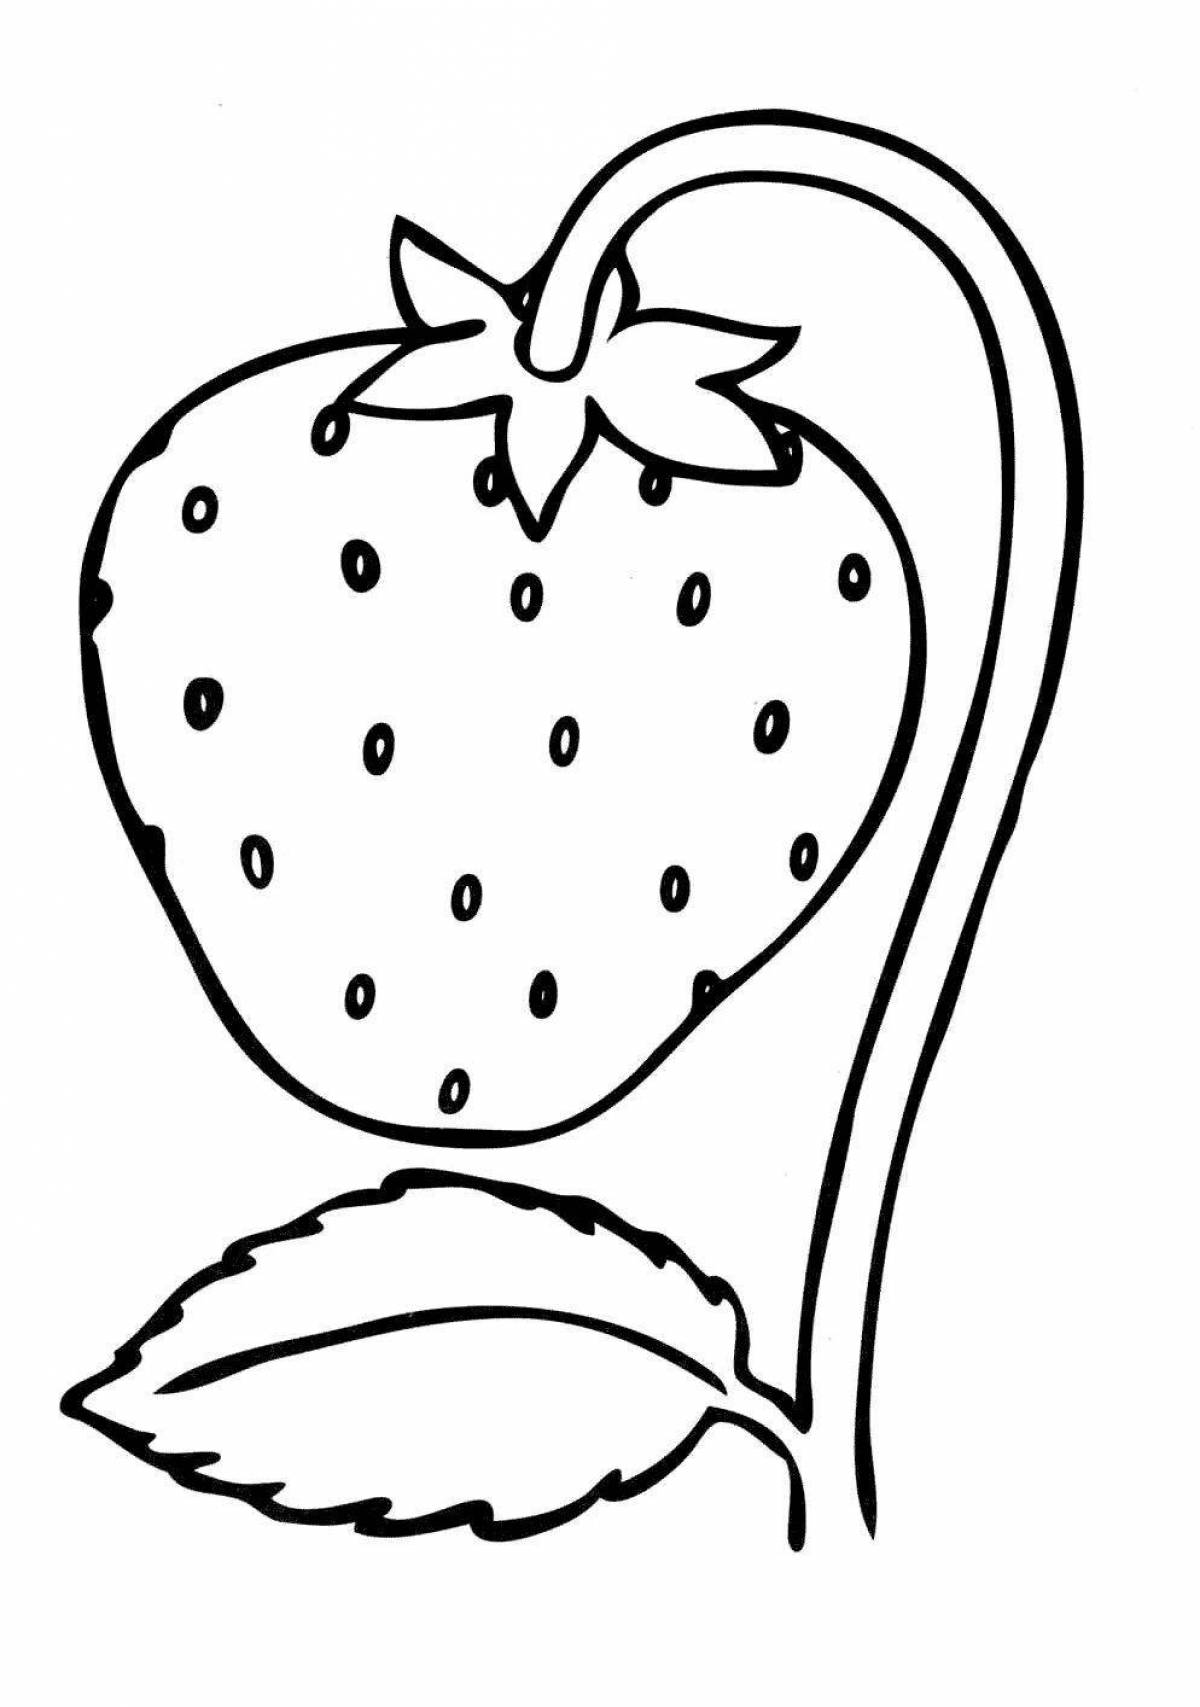 Simple and easy to draw coloring pages